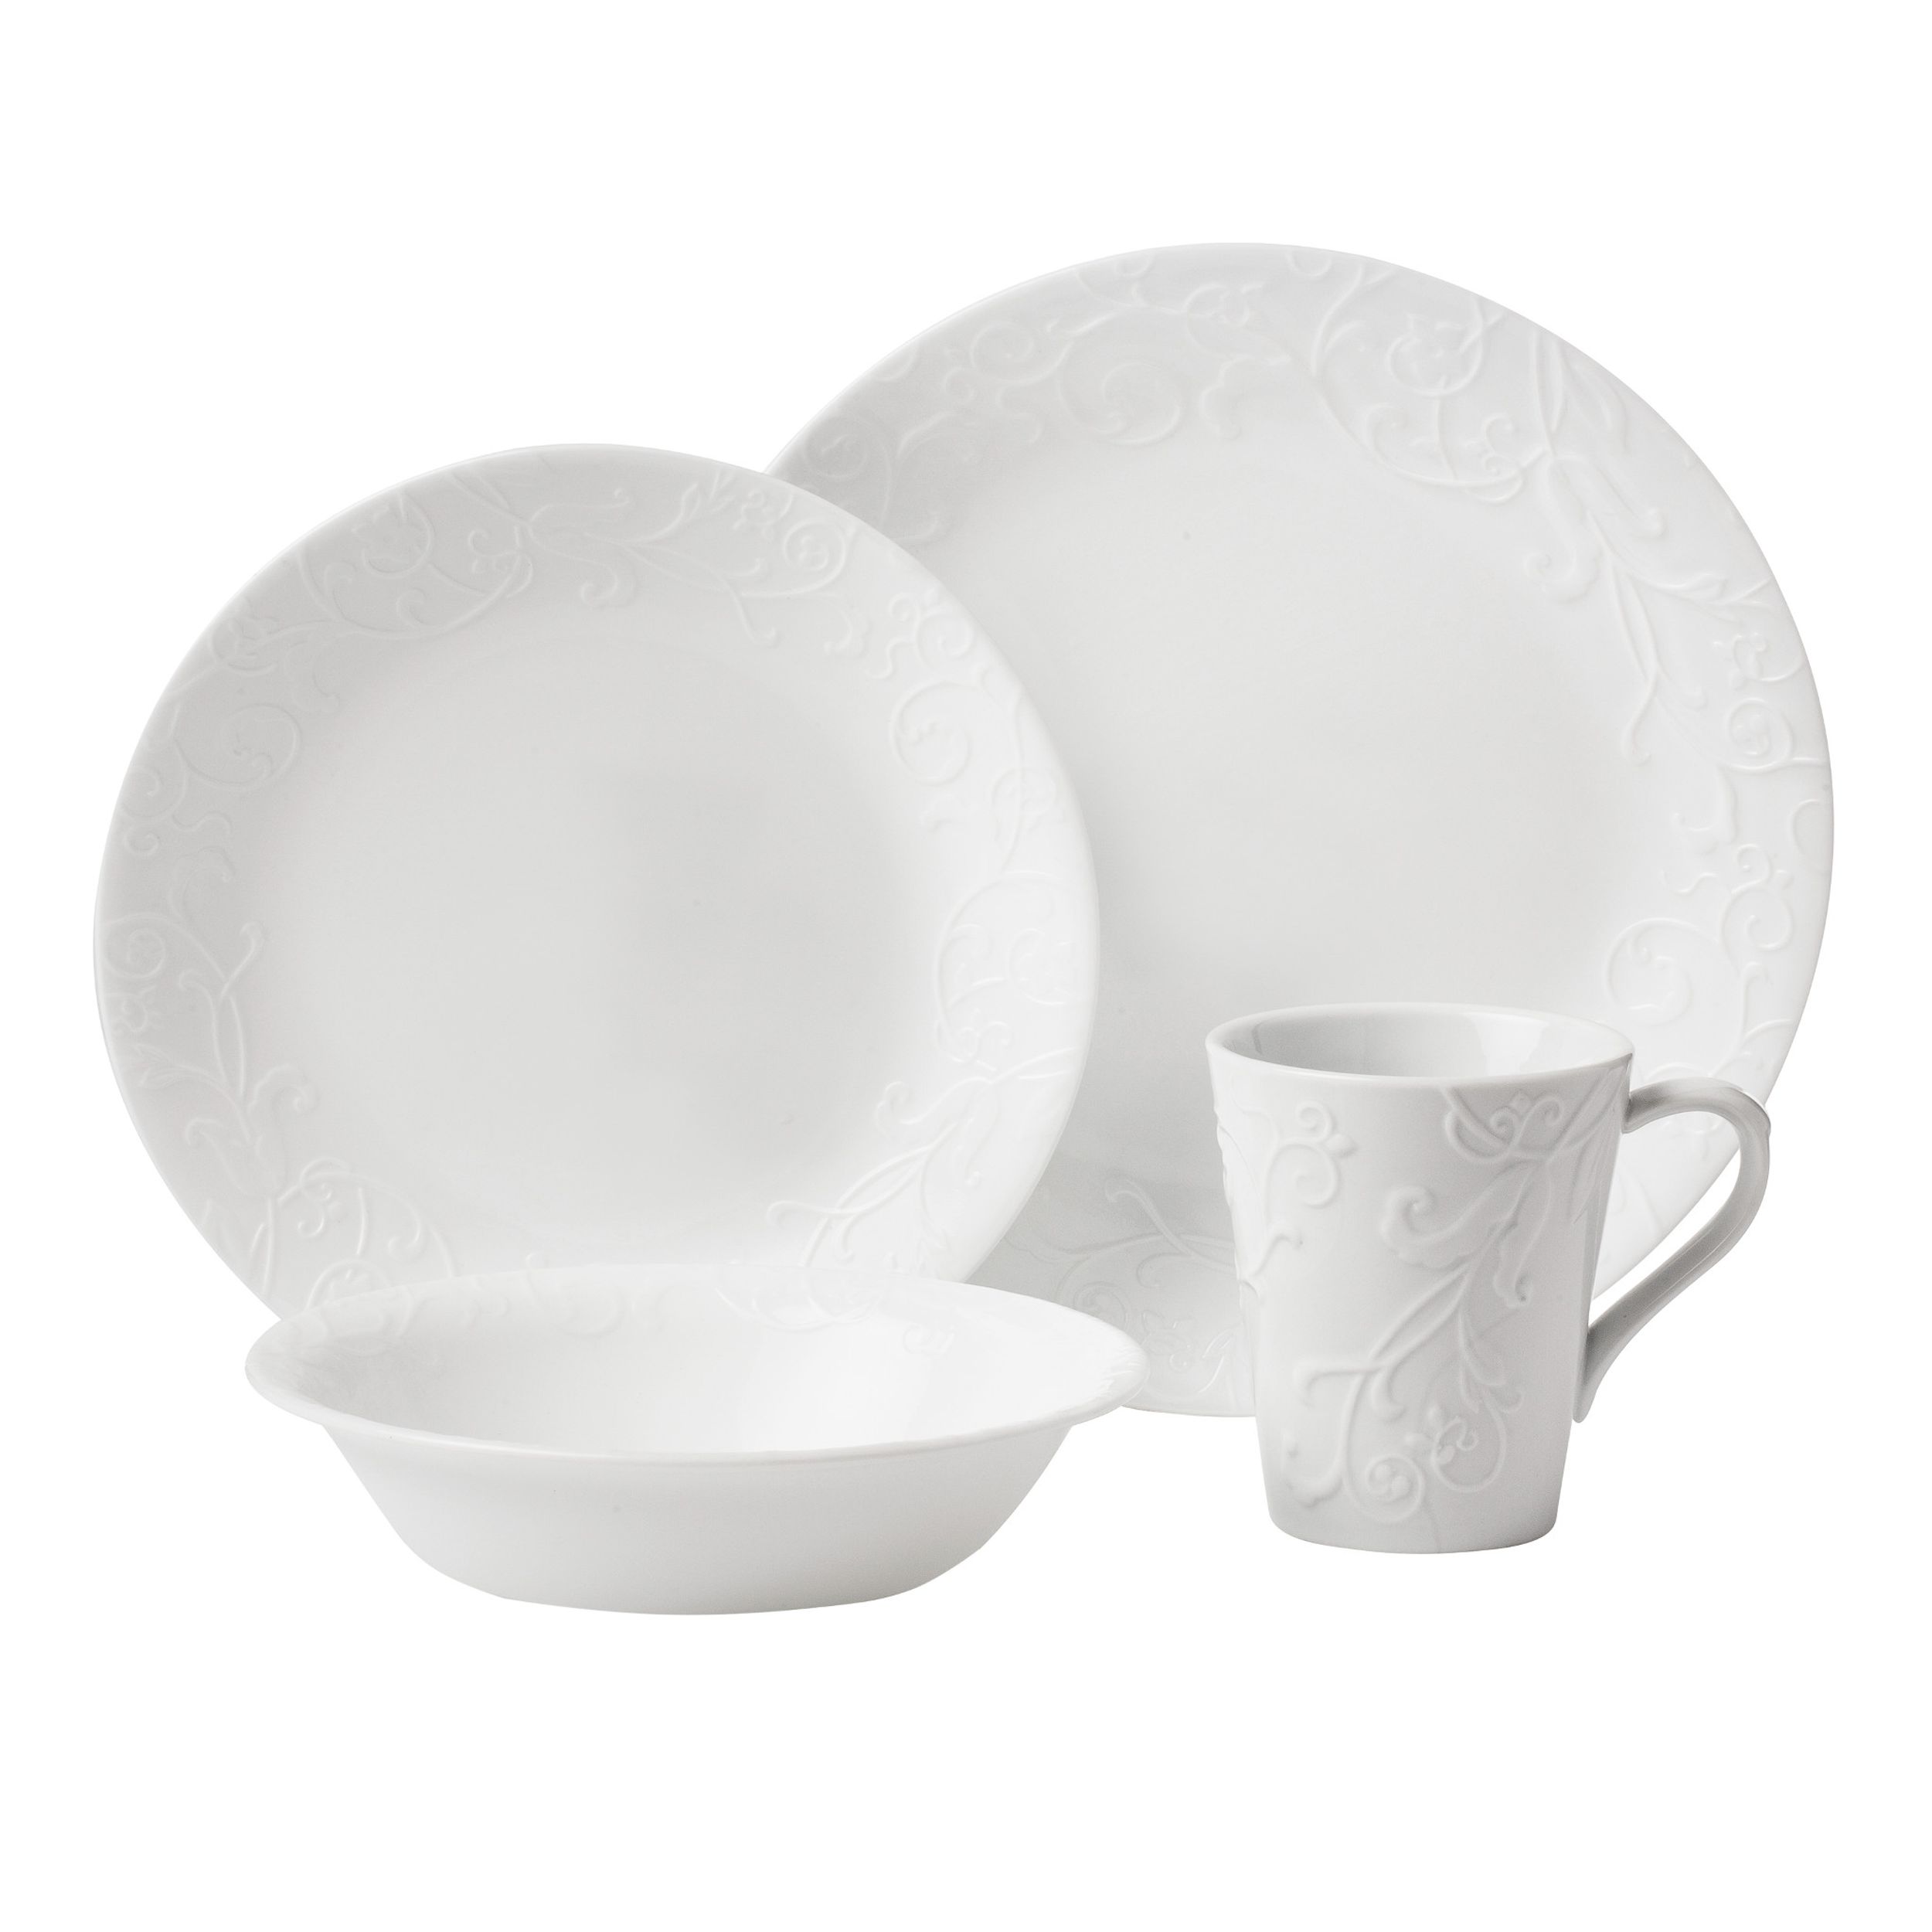 Corelle Winter Frost White 5-piece Snack Set - image 1 of 12